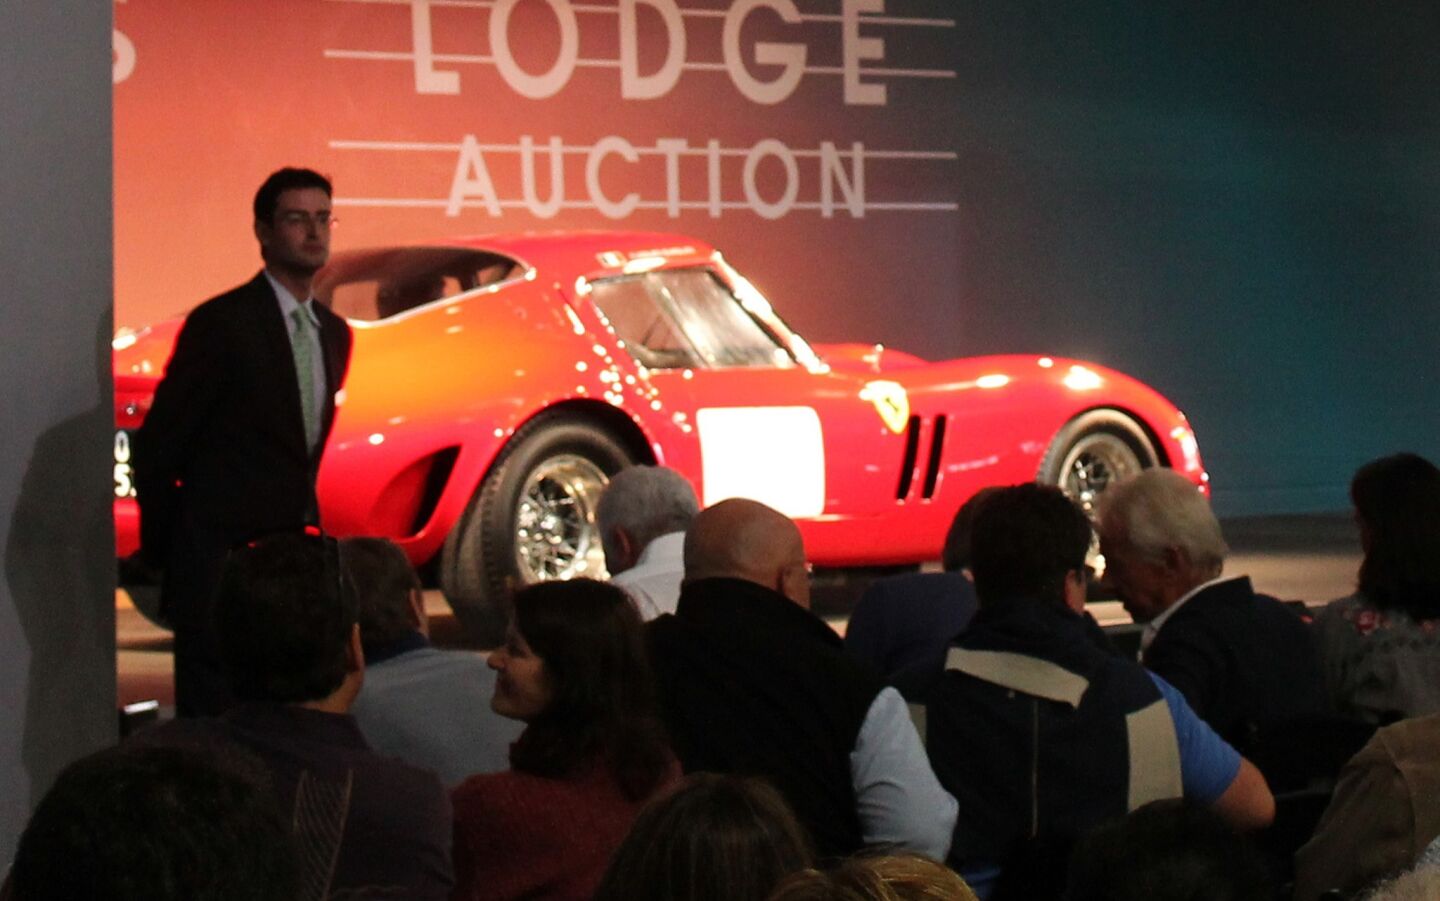 A 1962 Ferrari 250 GTO, regarded by many as the holy grail of classic cars, sold at auction Thursday night in Carmel for about $38 million.